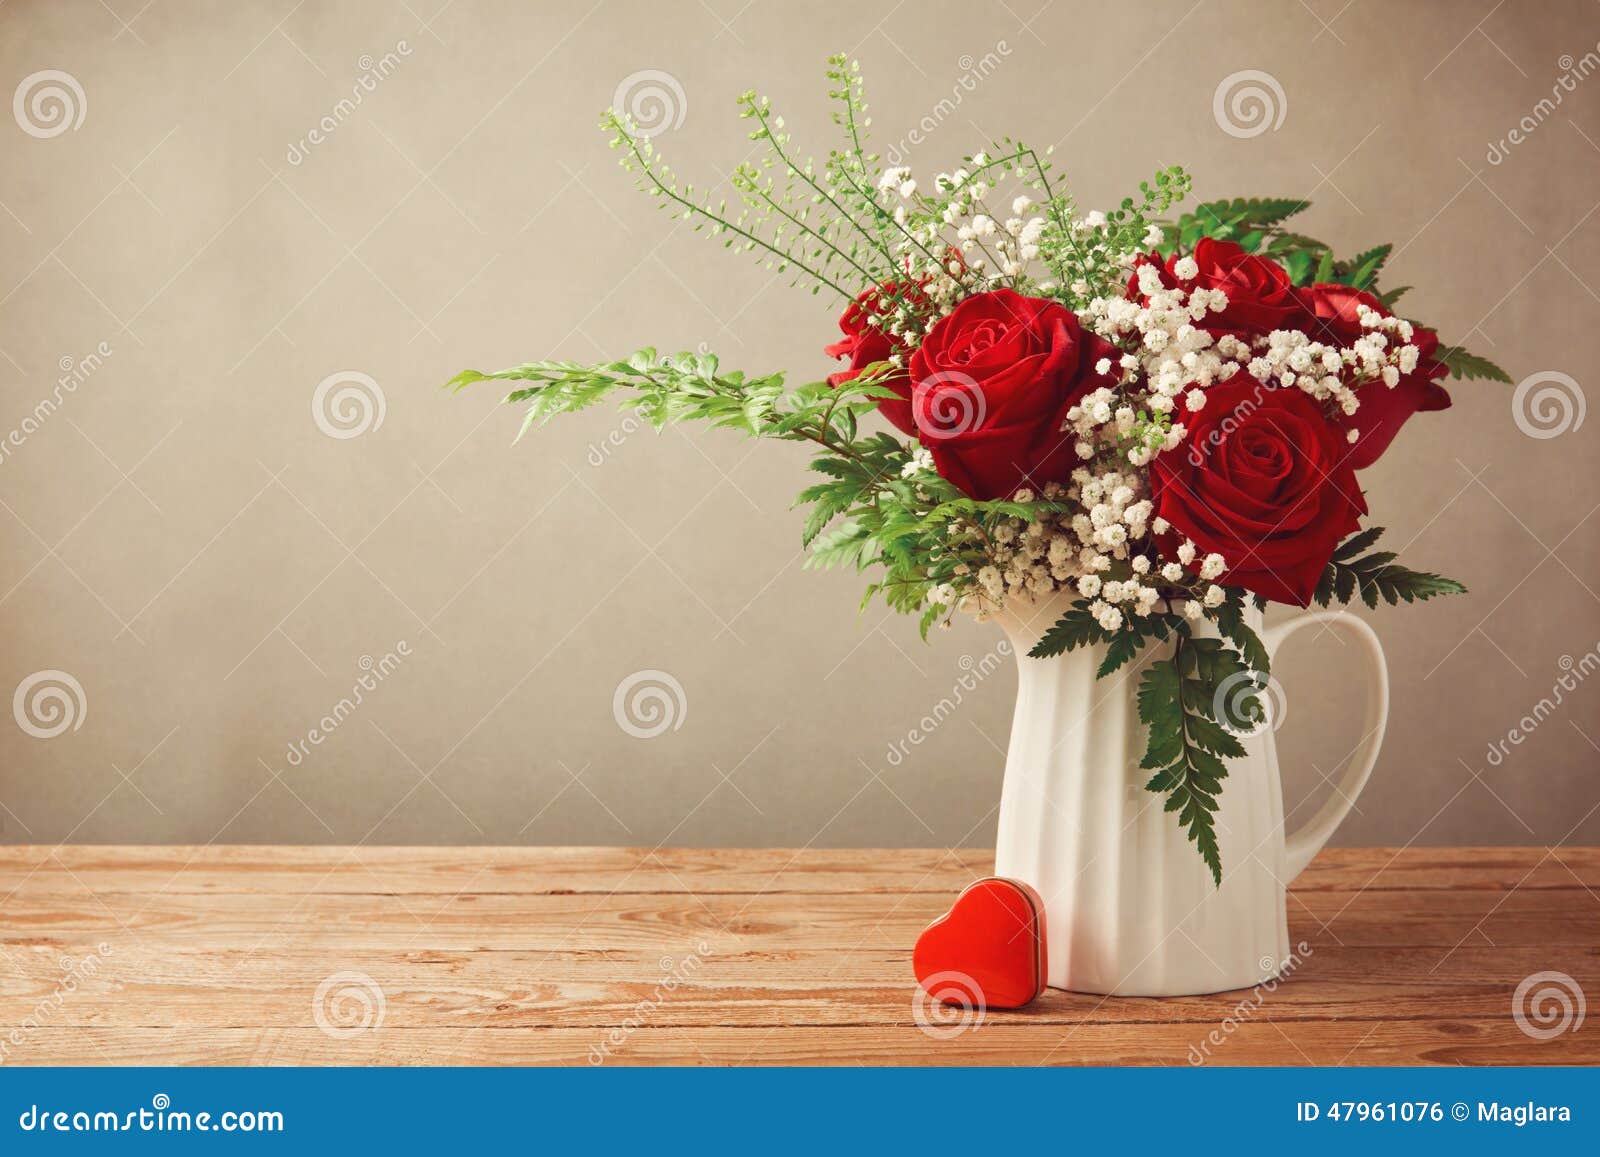 Heart Flower Bouquets On a Table